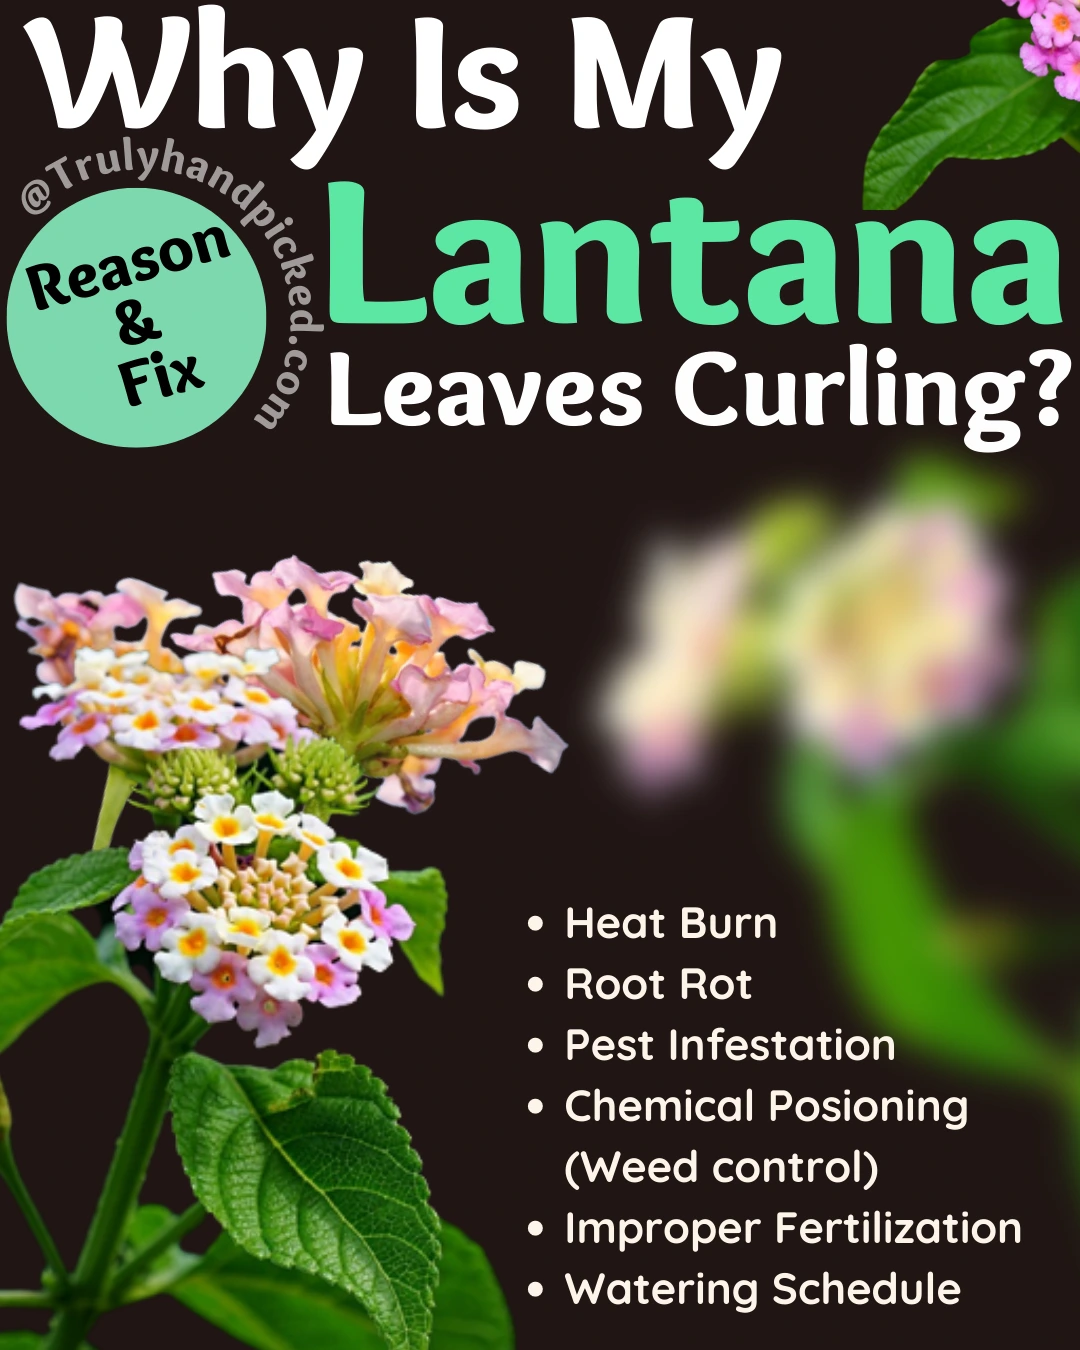 Reasons and fix for why your lantana leaves are curling